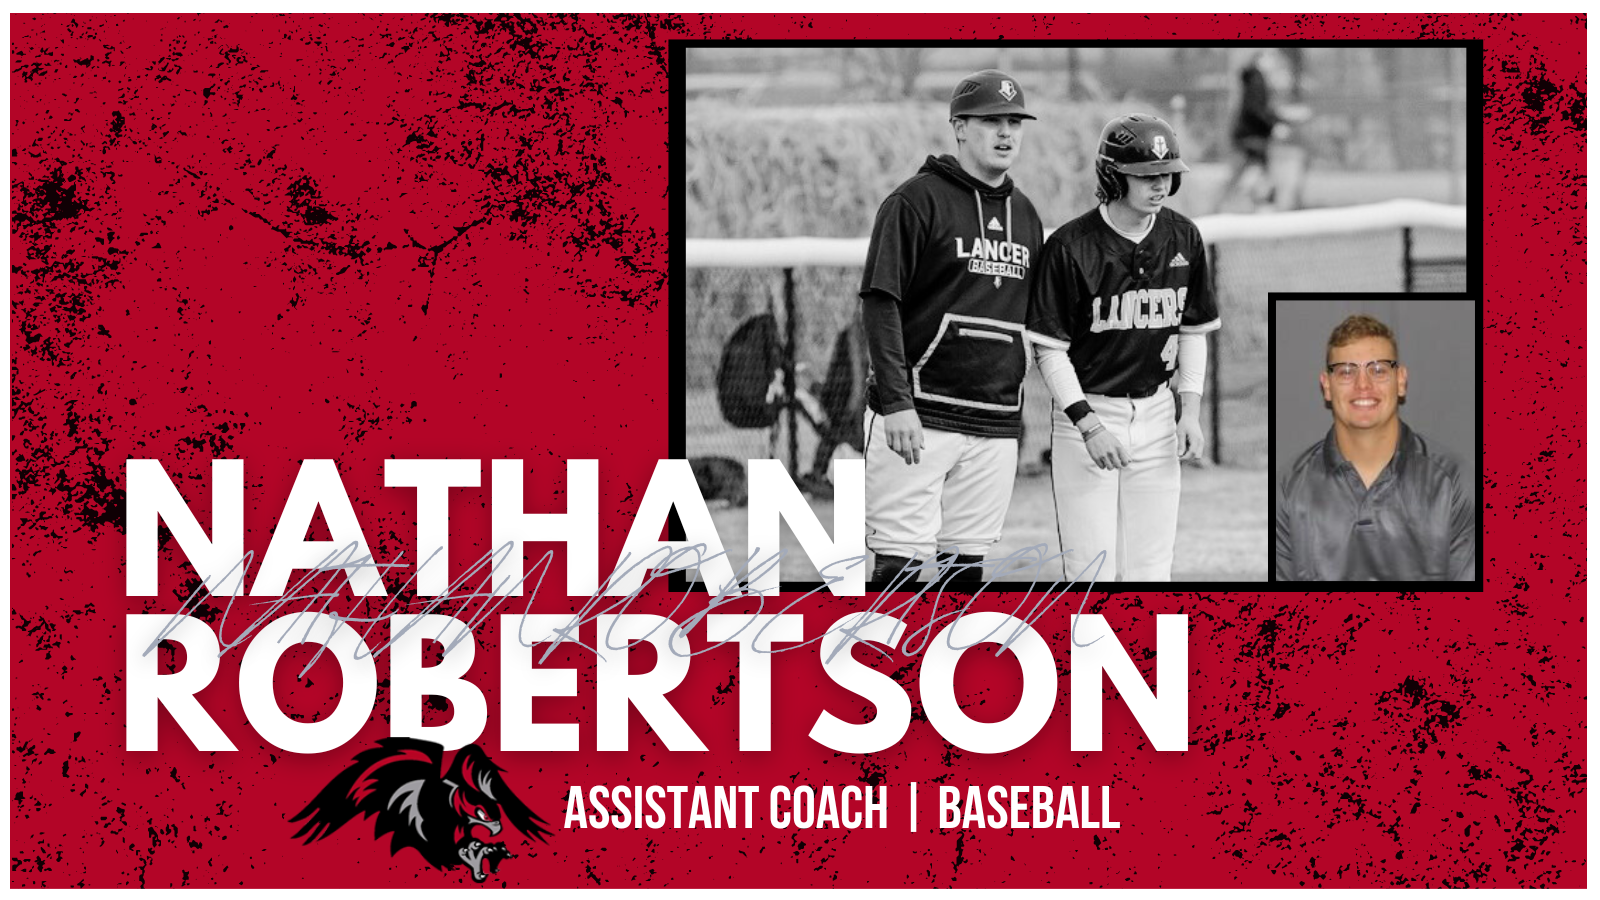 Robertson hired as Assistant Baseball Coach